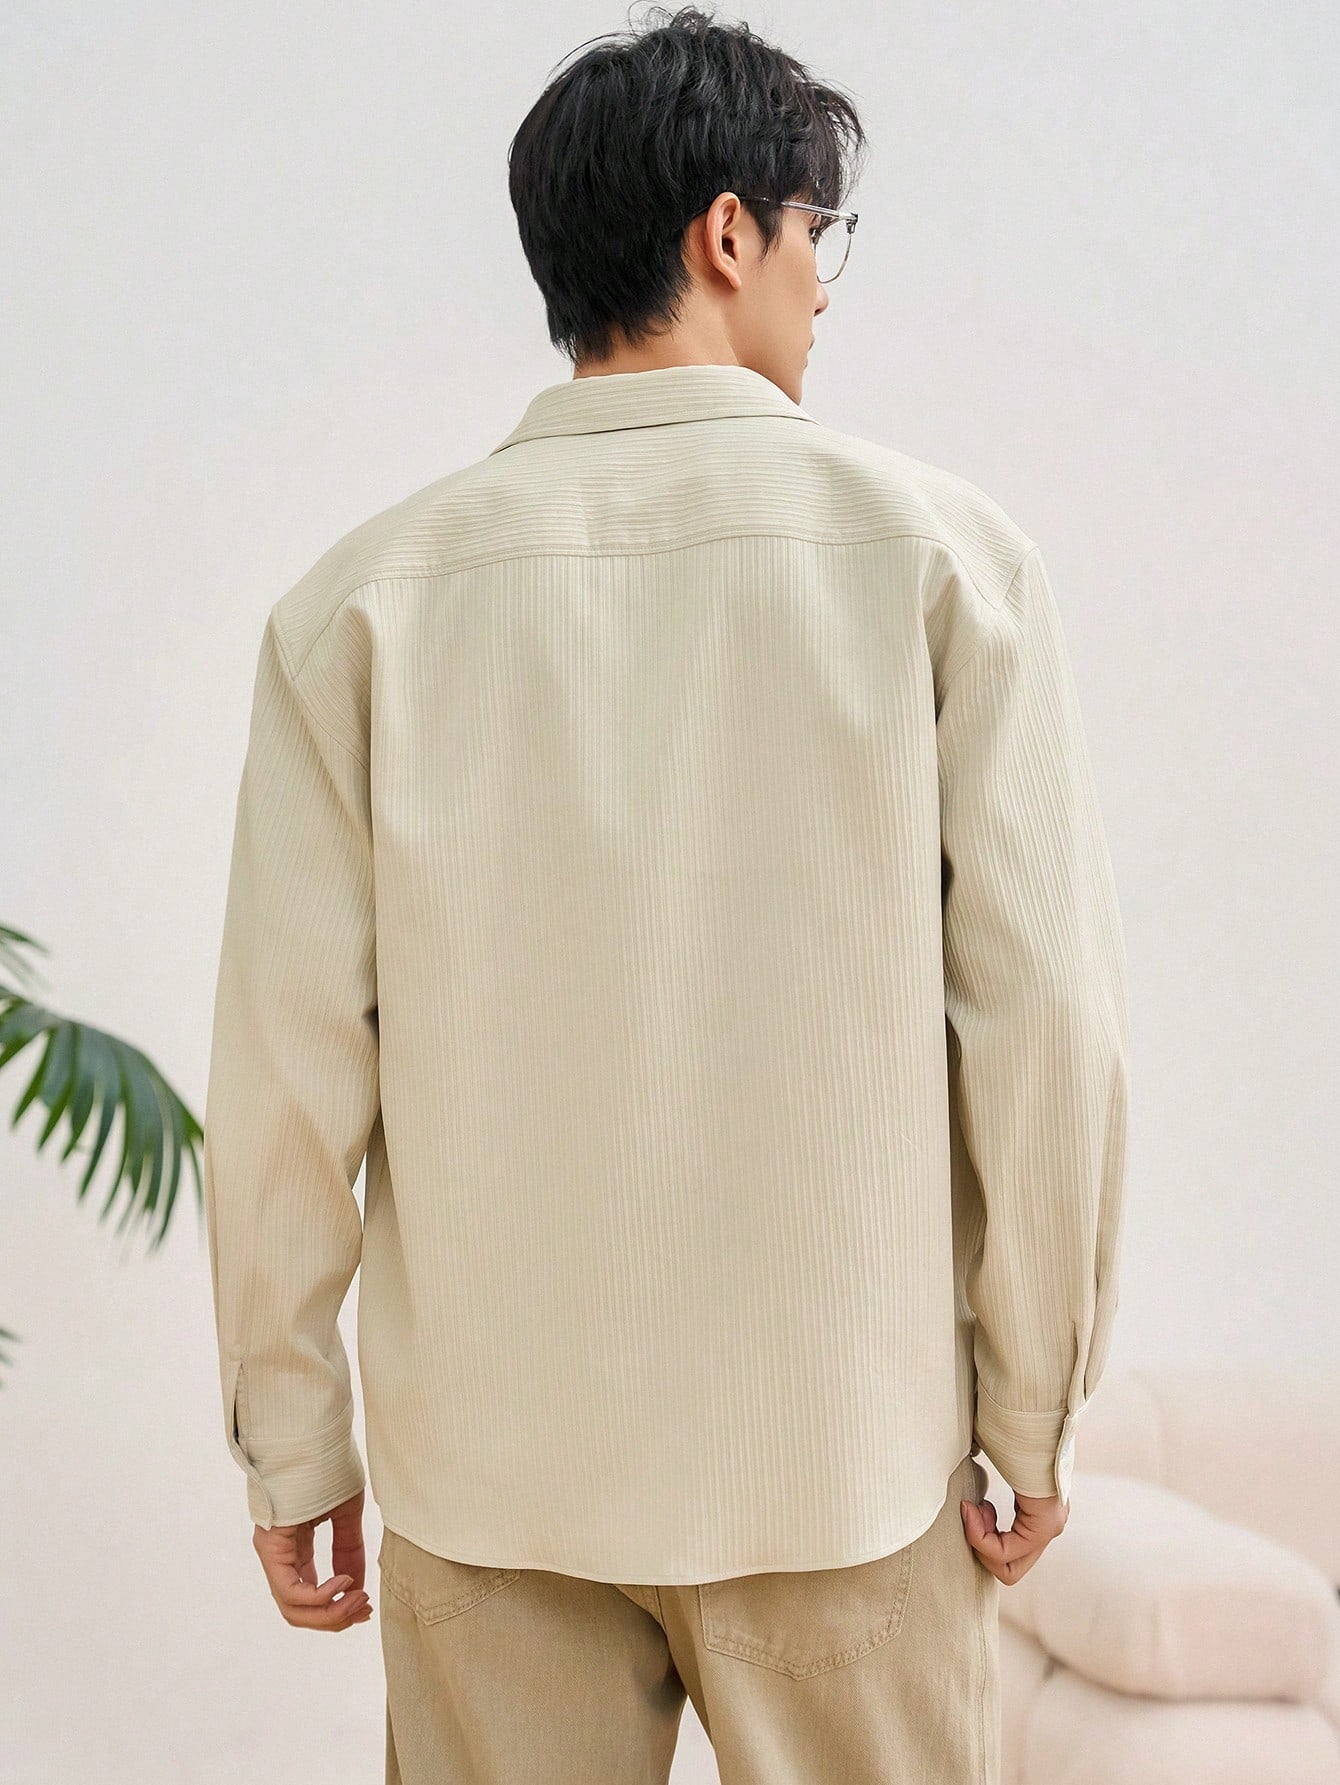 Men's Solid Color Long Sleeve Shirt For Spring And Summer